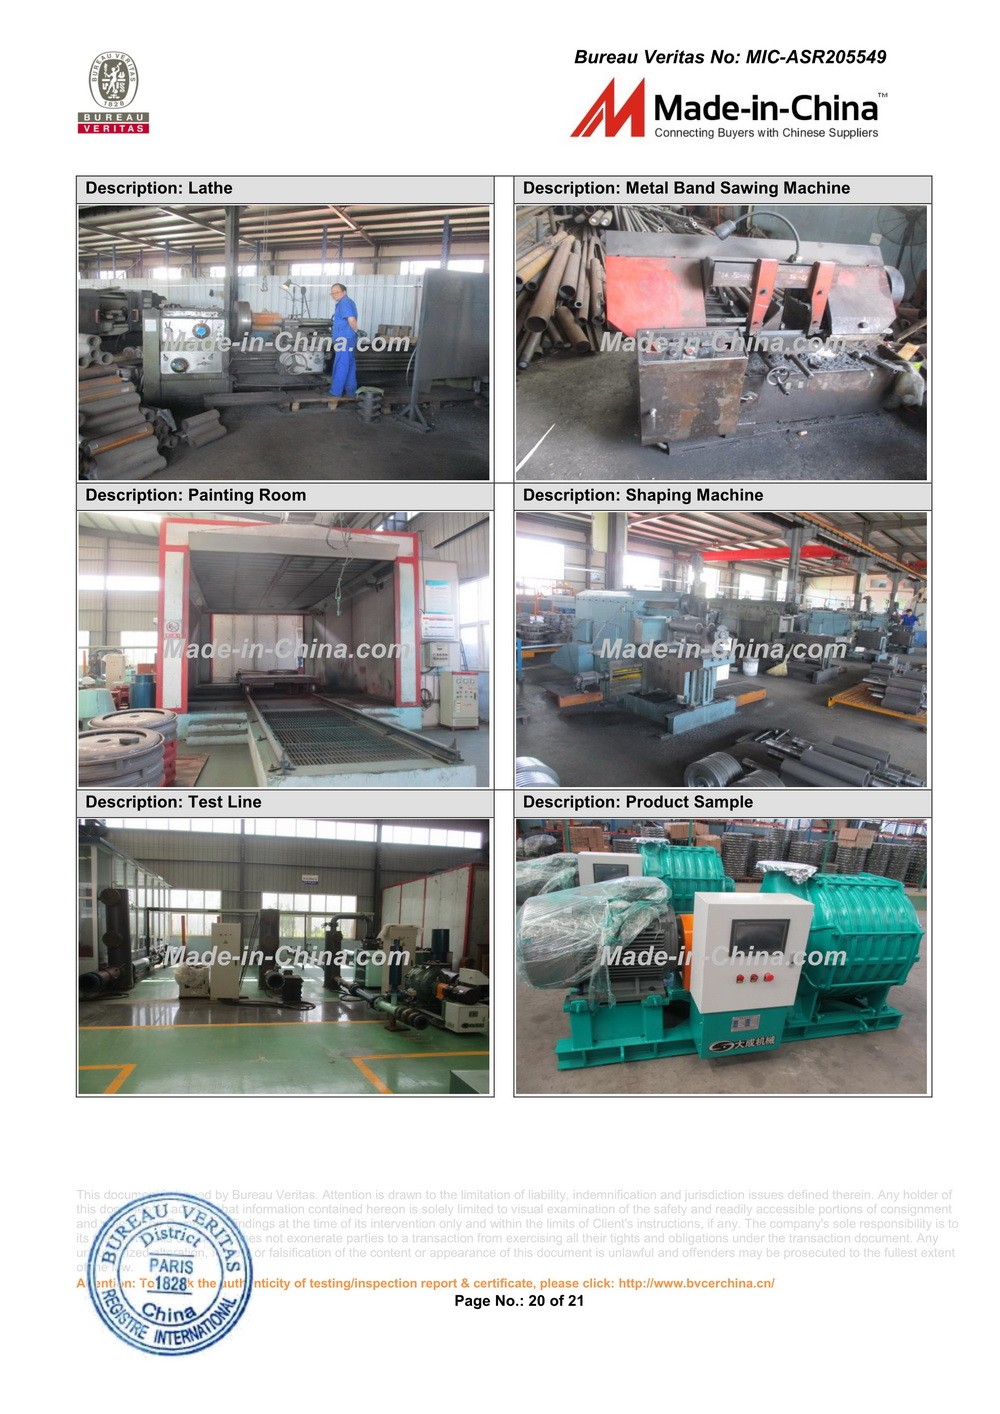 The BV conducted an on-site audit of Shandong Dacheng Machinery Technology Co.,Ltd.